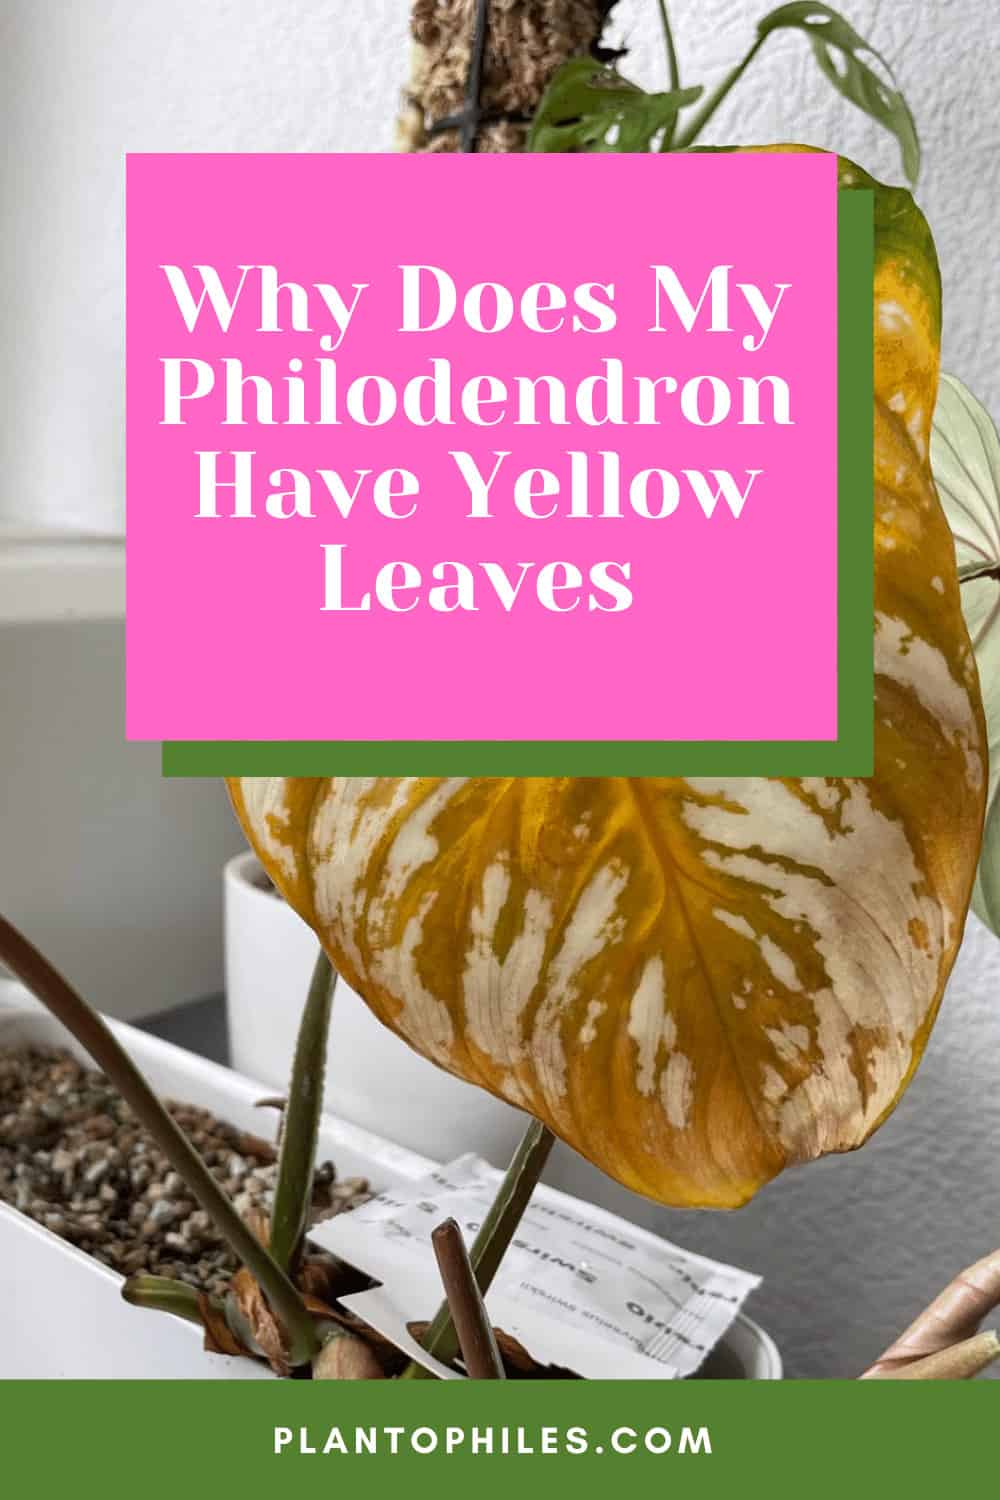 Why Does My Philodendron Have Yellow Leaves?